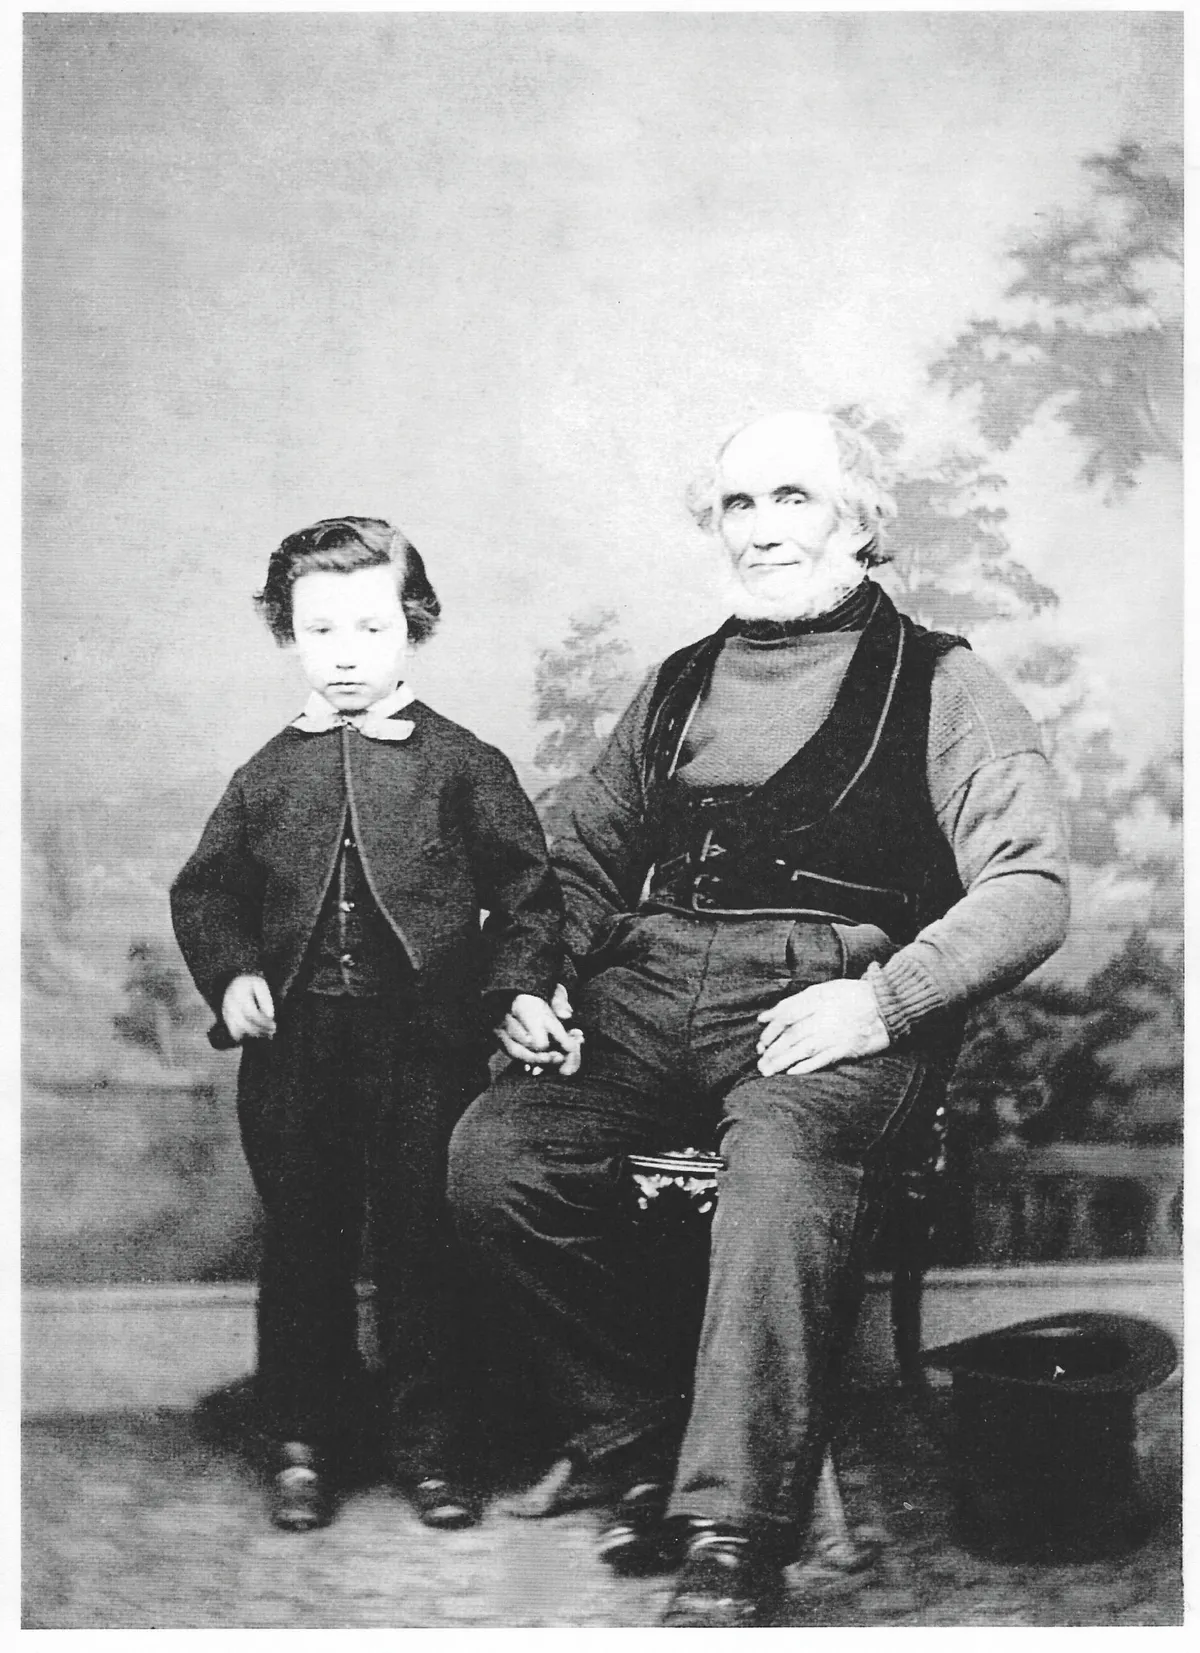 Black and white photograph of an old man with a beard and a little boy in a suit